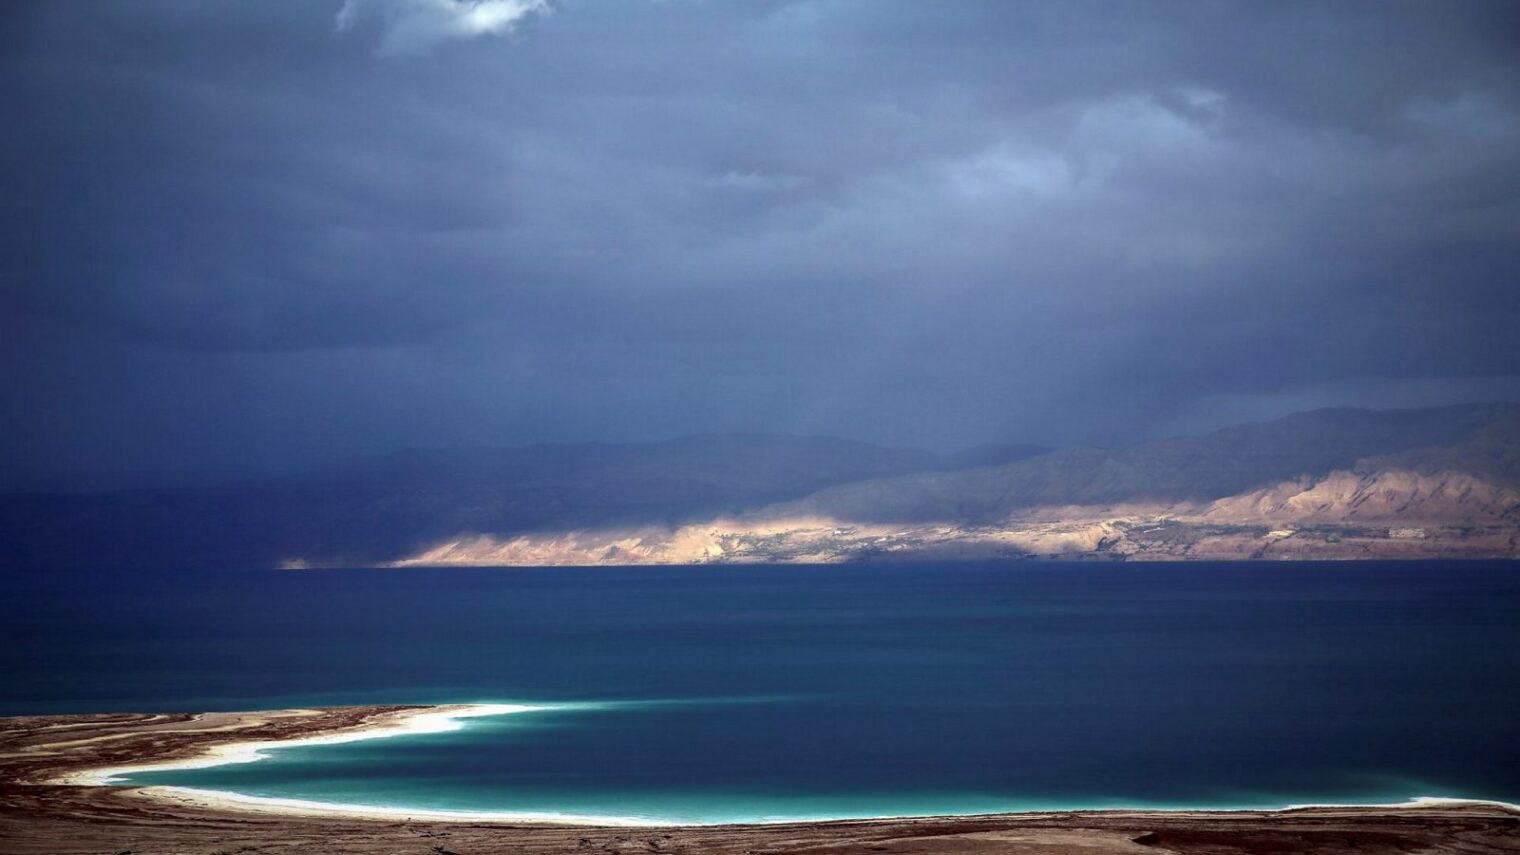 Because we have the lowest sea on earth. A view of the Dead Sea following heavy rain. Photo by Yossi Zamir/FLASH90